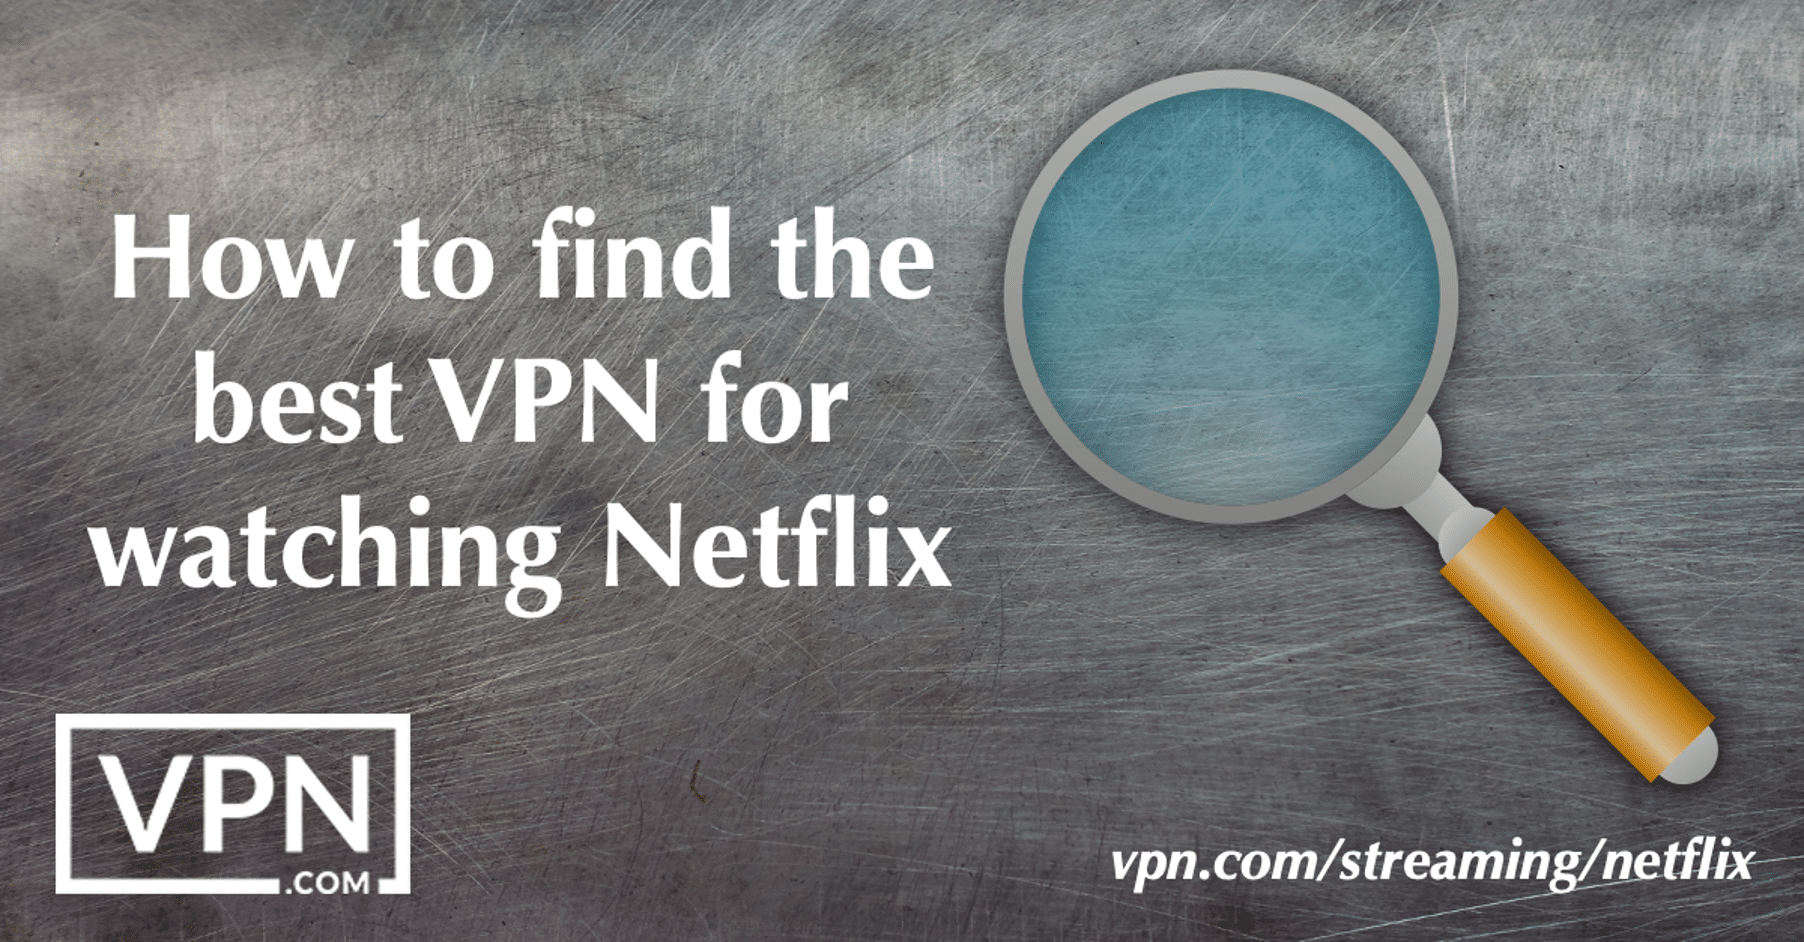 How to find the best VPN for watching Netflix